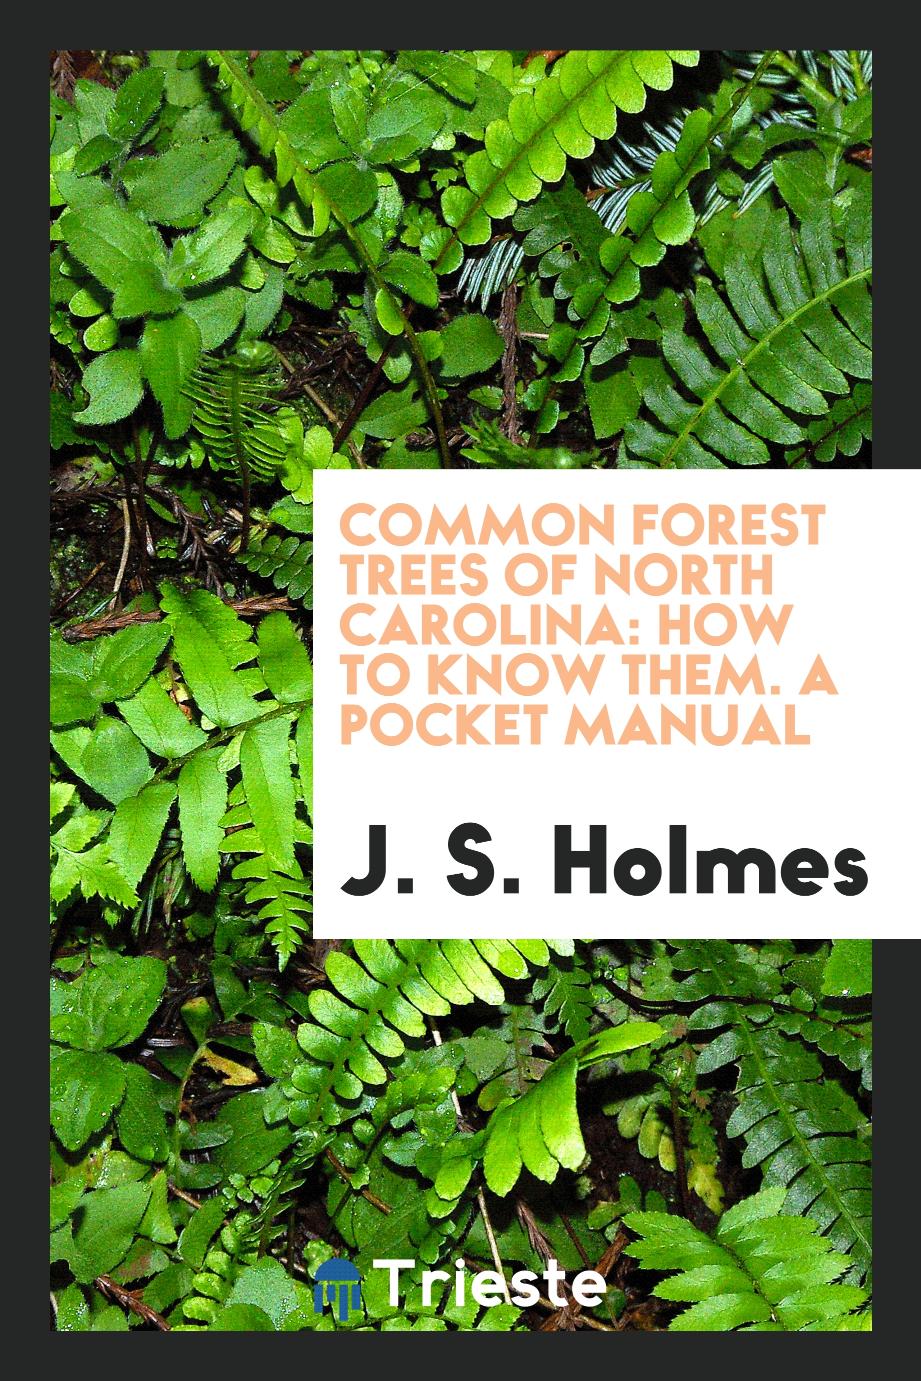 Common forest trees of North Carolina: how to know them. A pocket manual